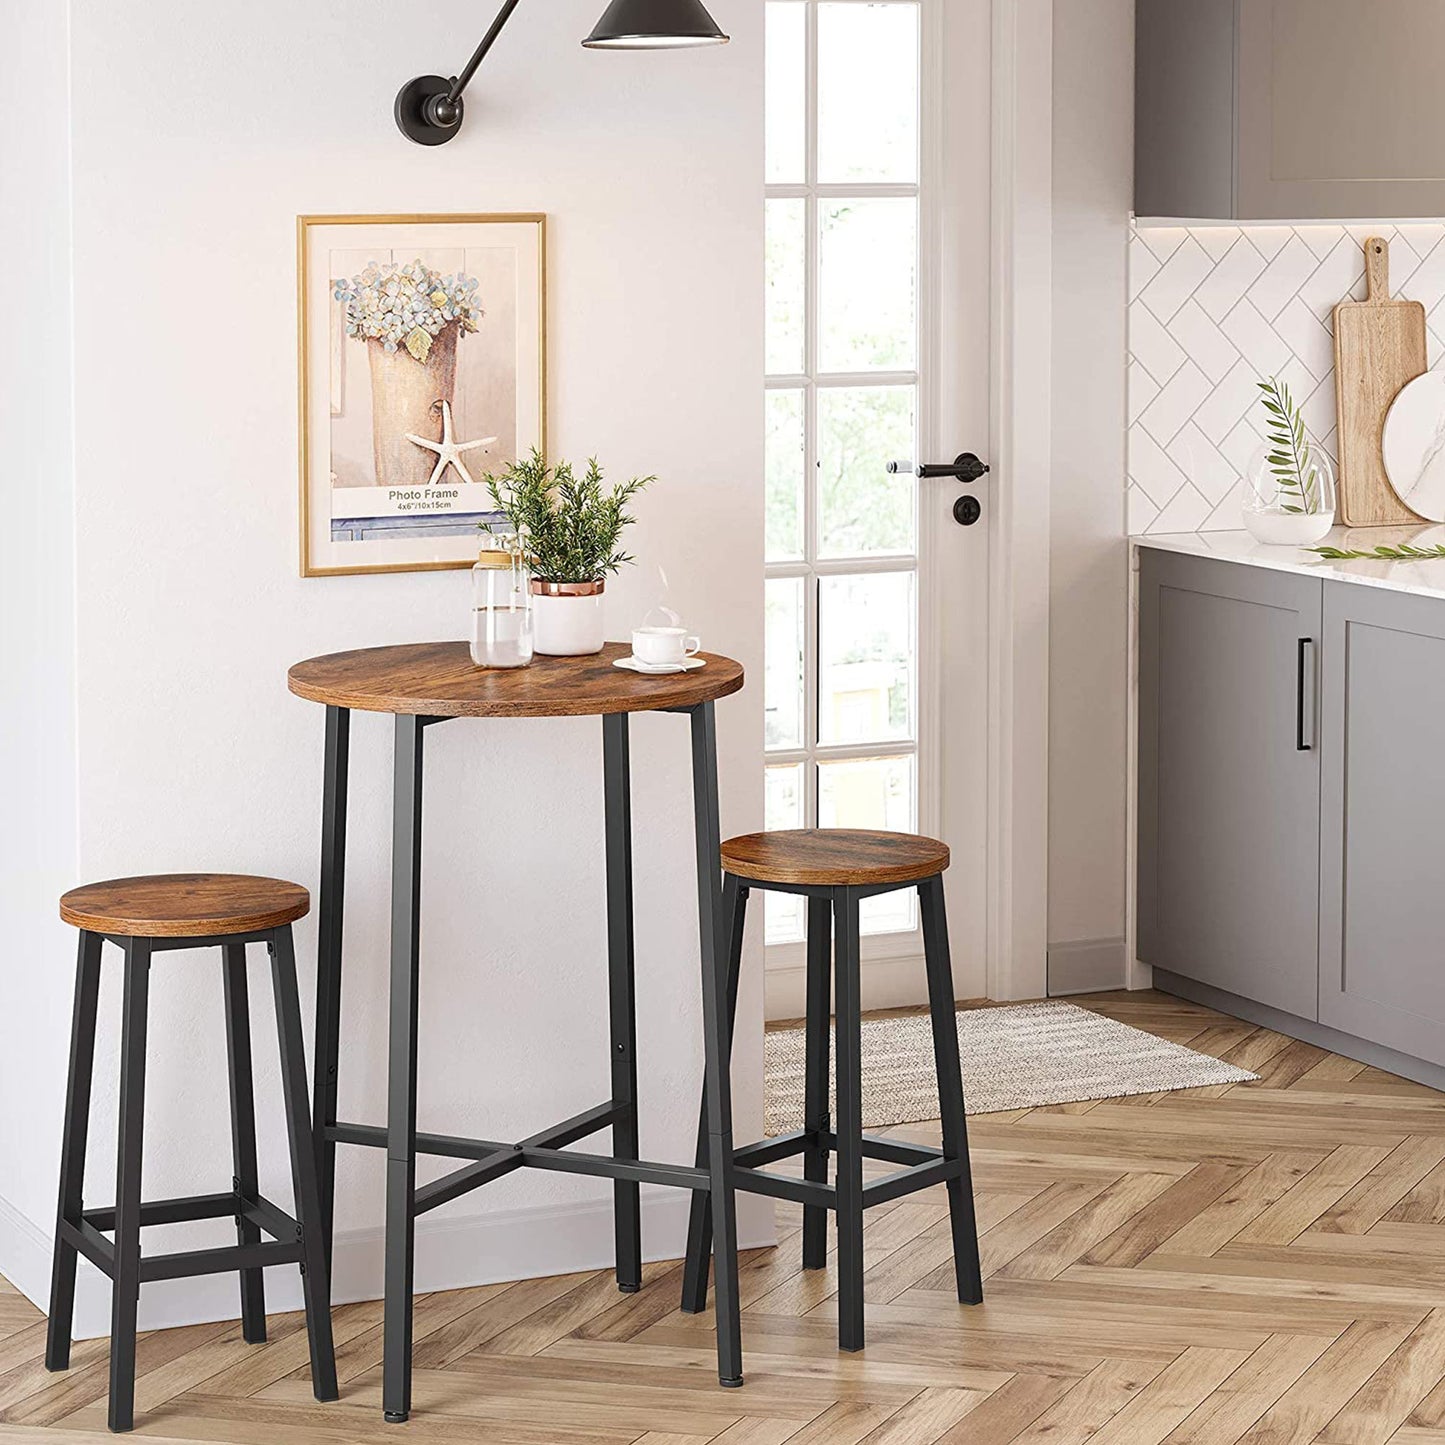 Set of 2 Bar Stools, Tall Kitchen Stools, Sturdy Steel Frame, 65 cm Tall, Easy Assembly, Rustic Brown and Black, VASAGLE, 1